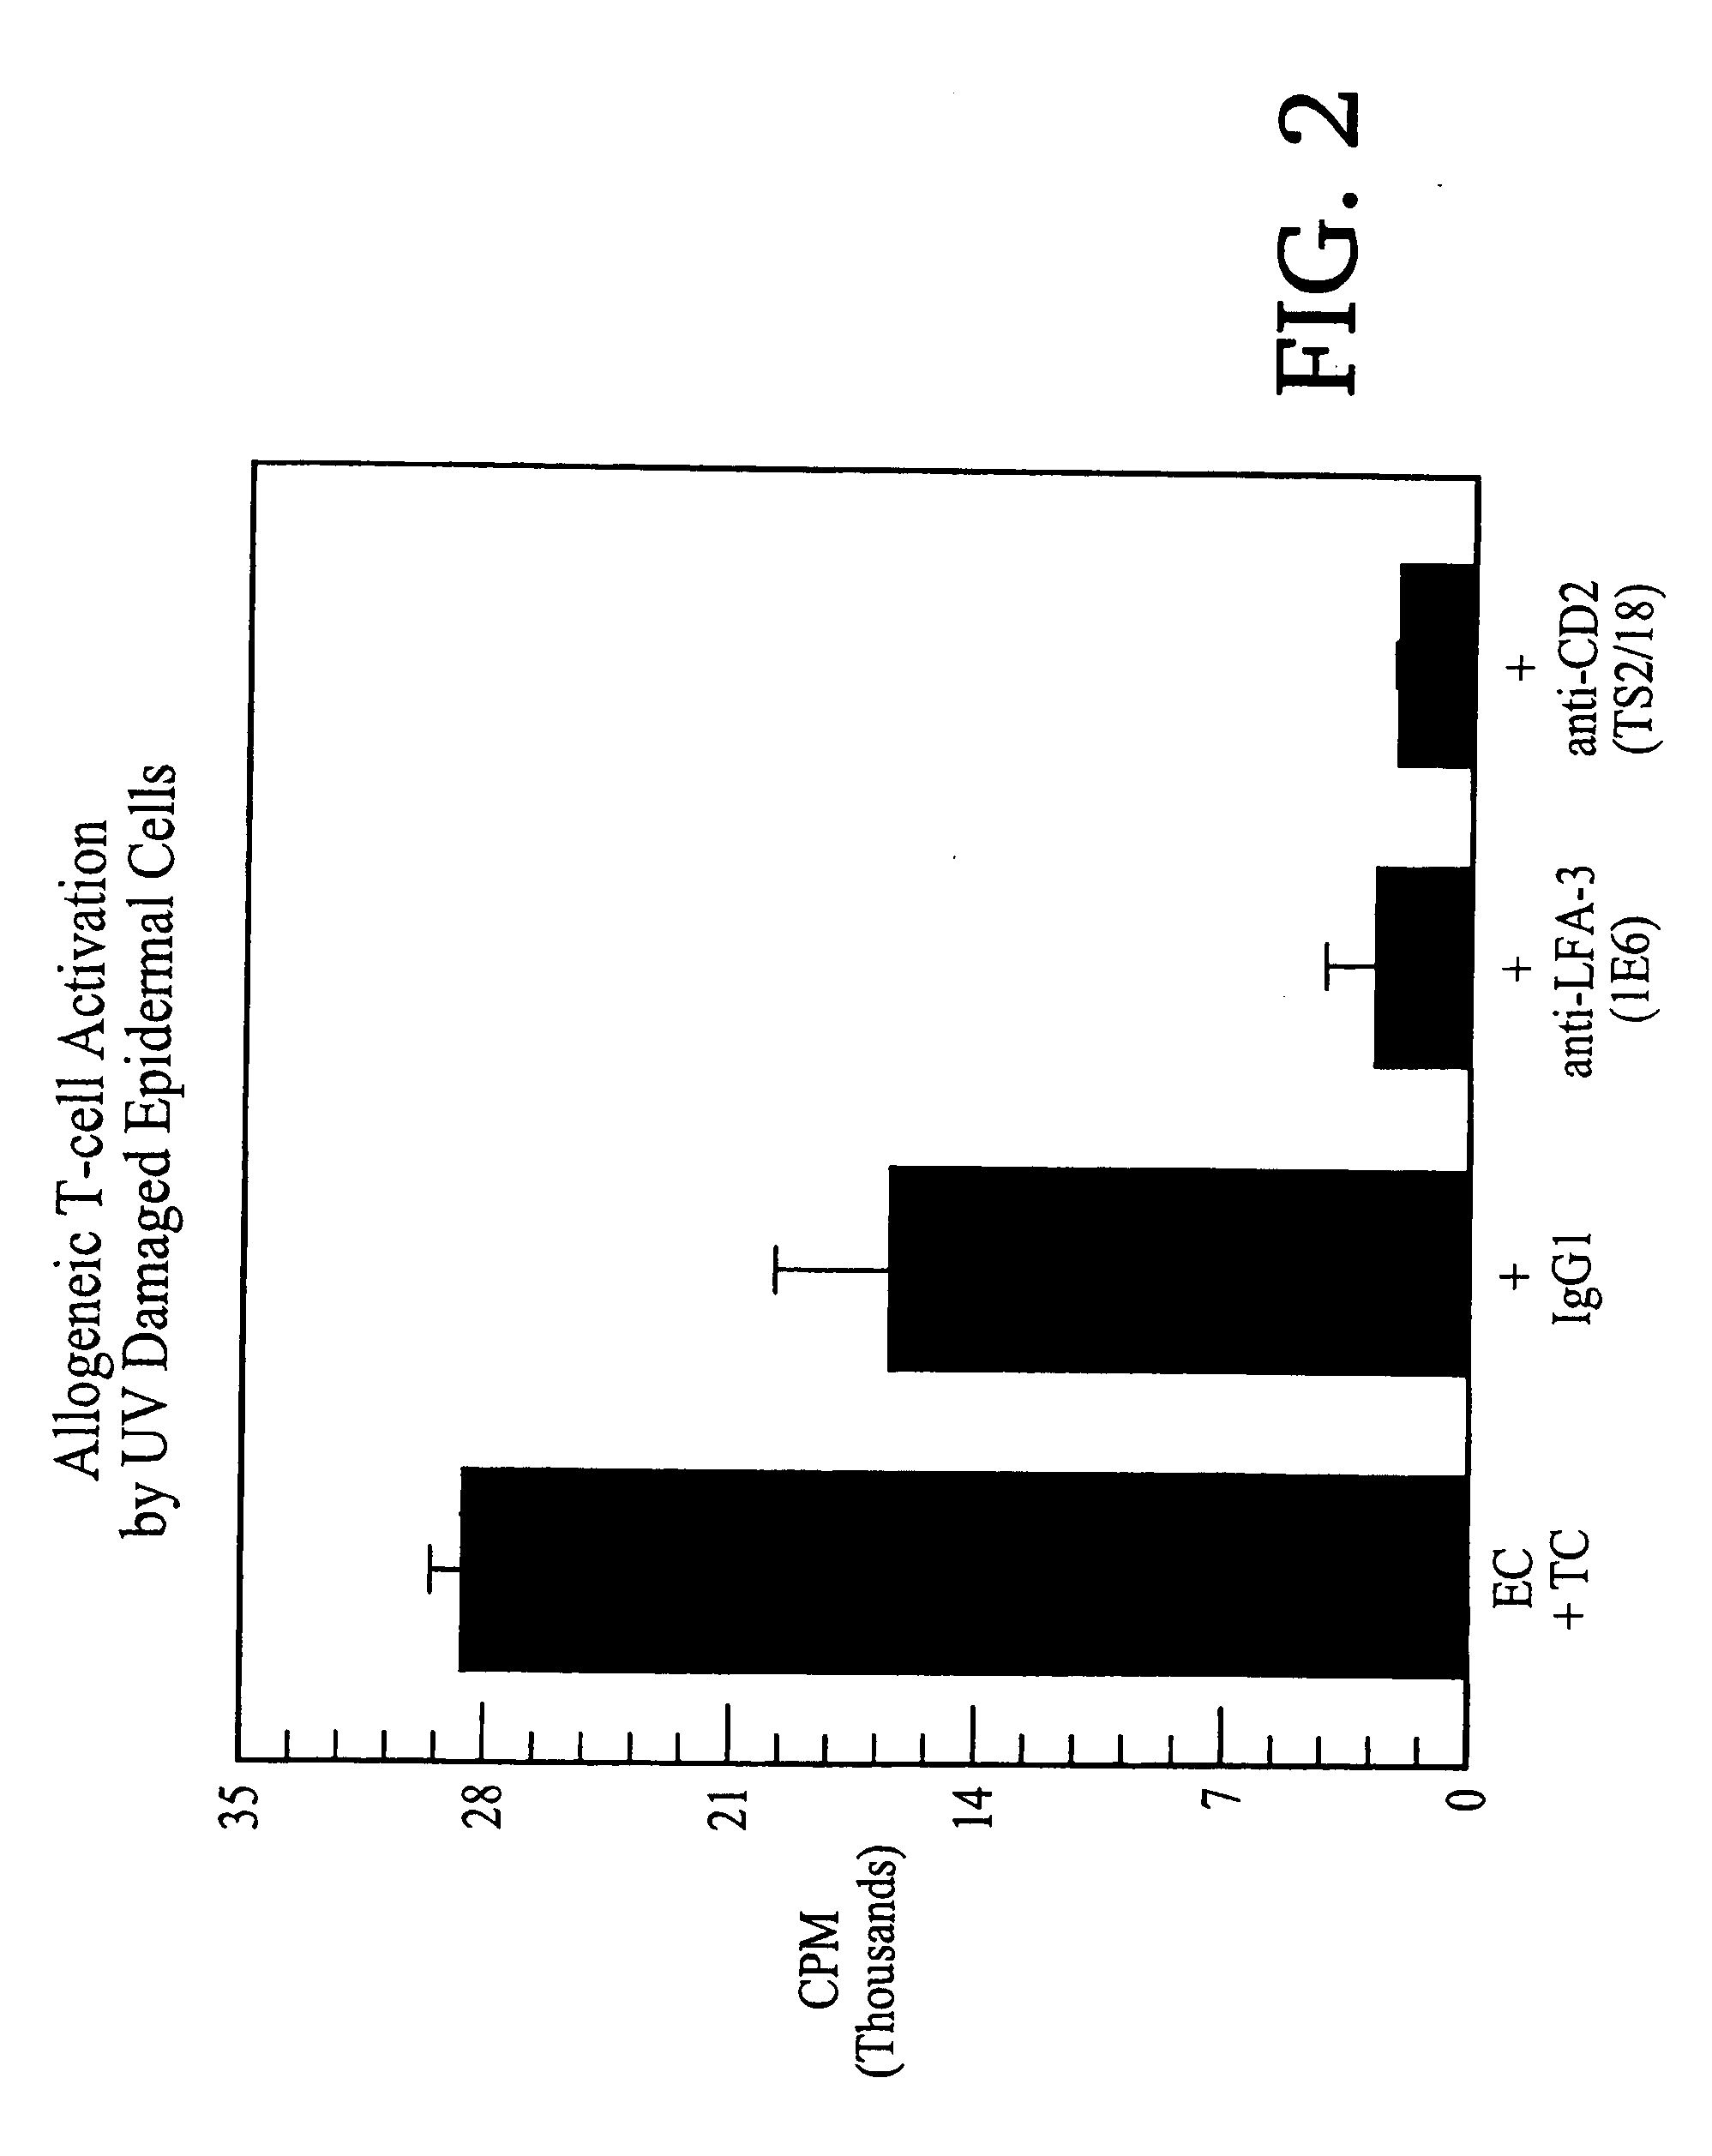 Methods of treating skin conditions using inhibitors of the CD2/LFA-3 interaction